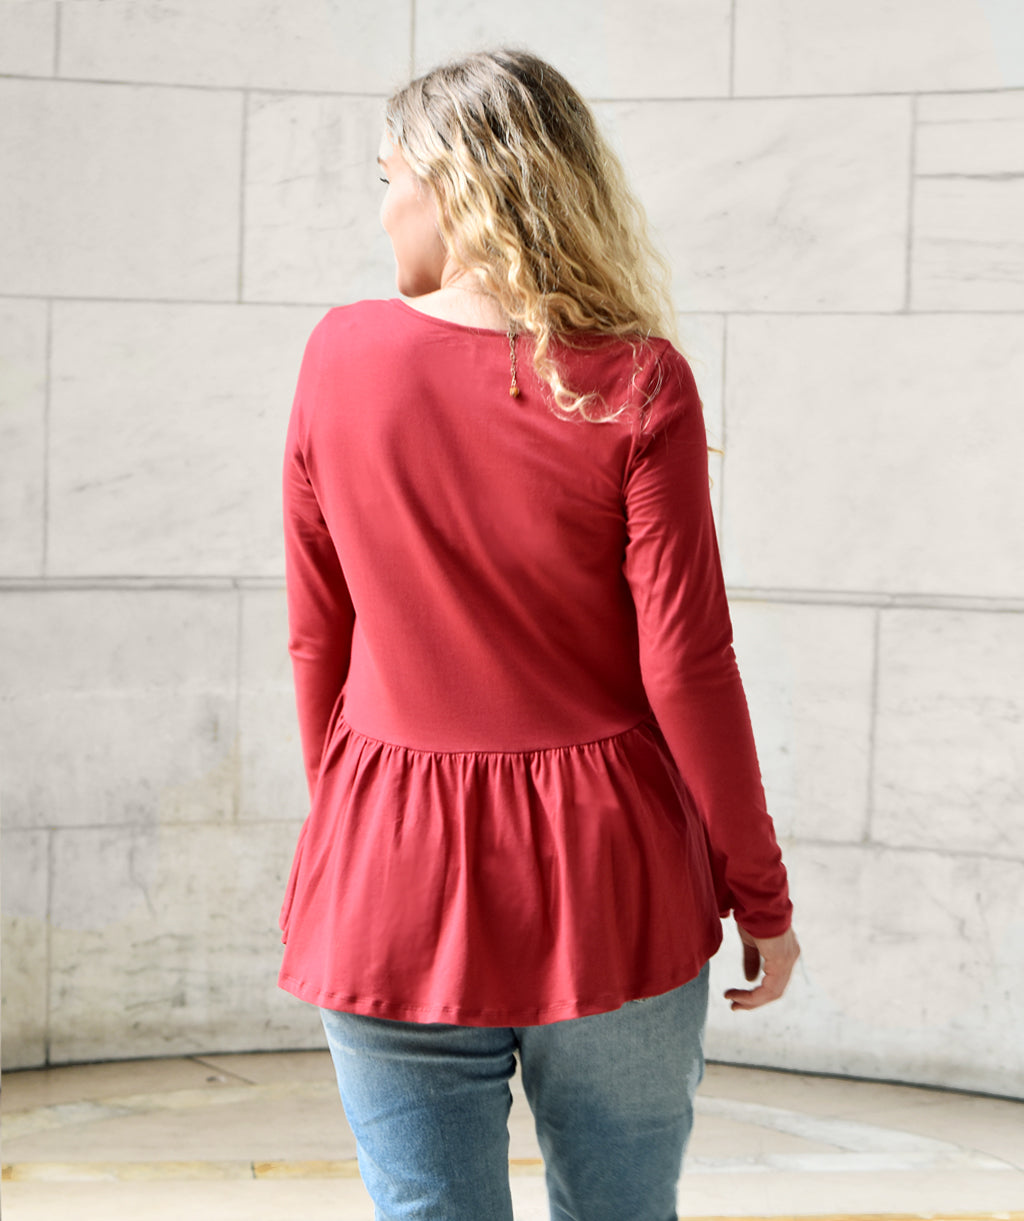 The WINTOUR top in Auburn Red